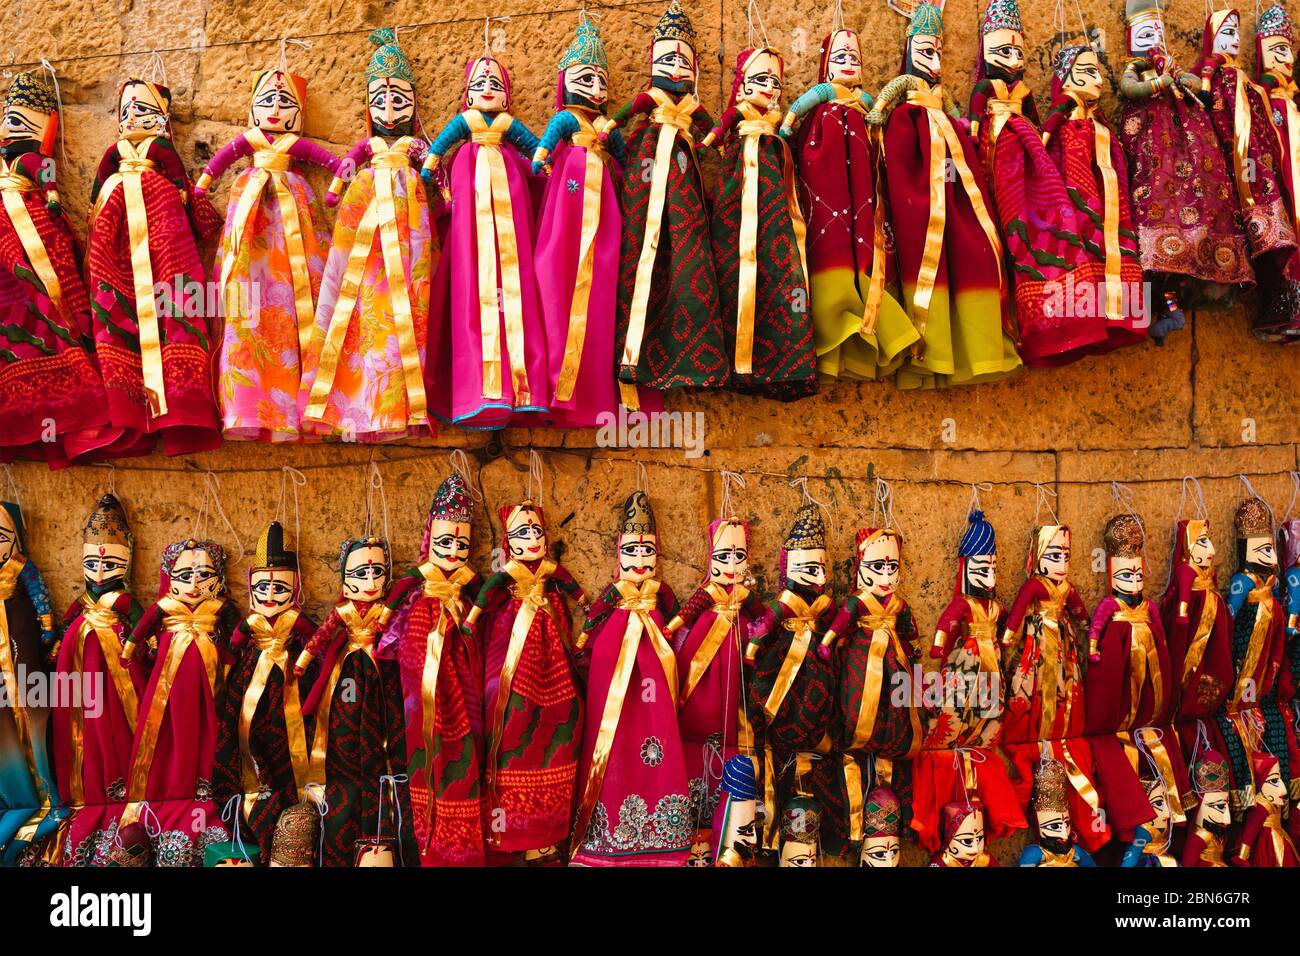 Traditional Rajasthani puppets for sale in Jaisalmer, Rajasthan, India. Stock Photo